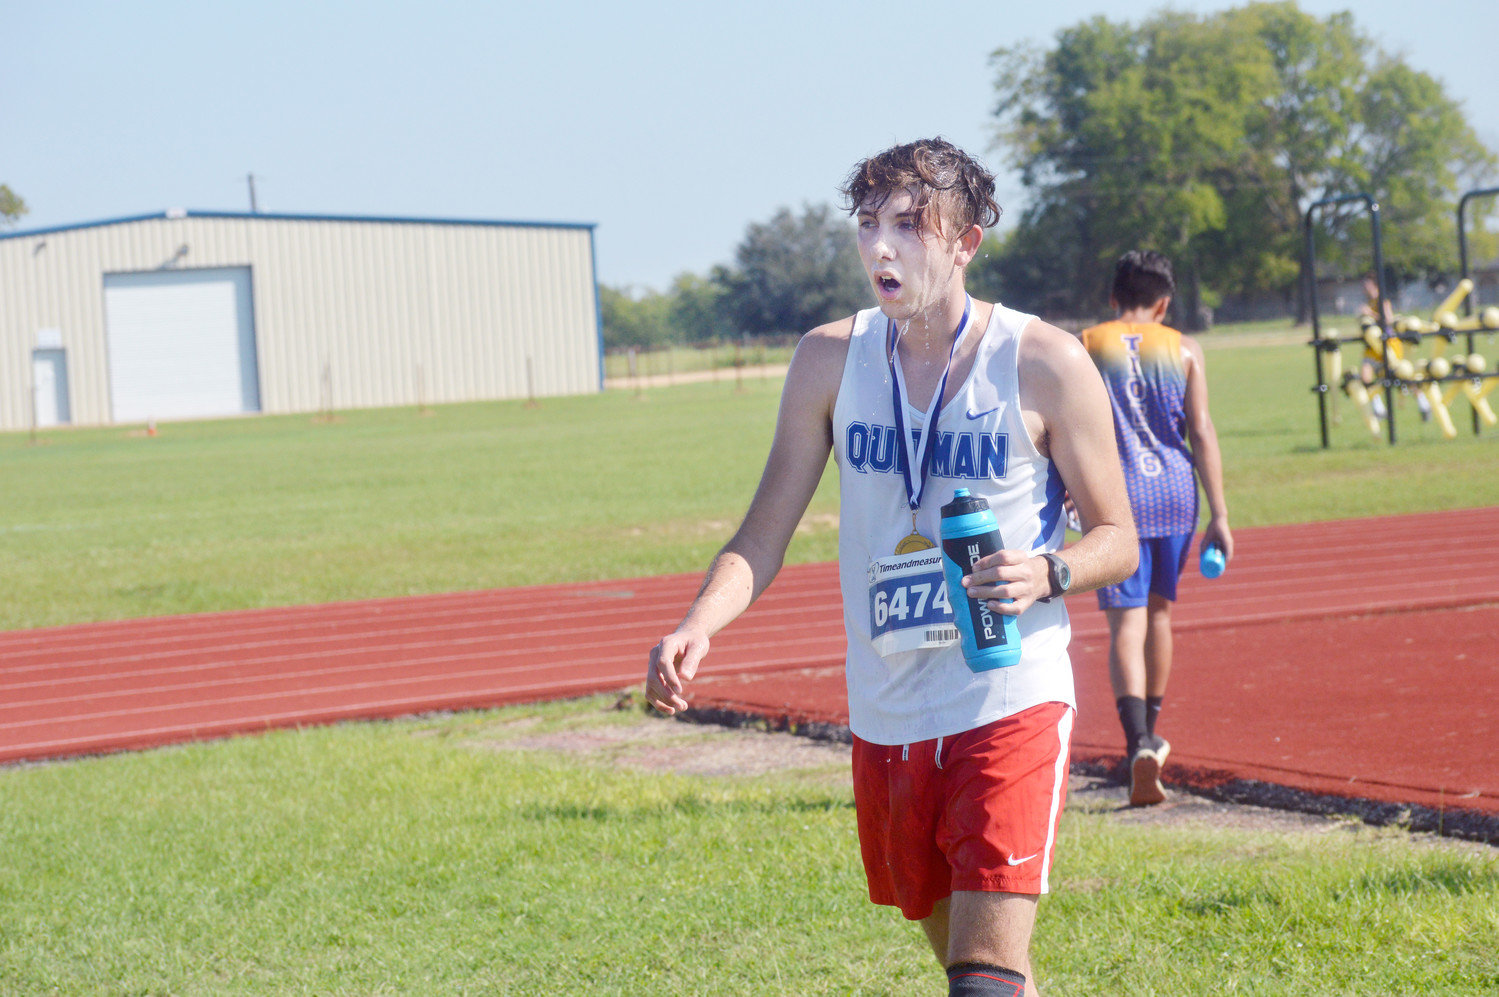 Dalton Brandon cools off after his 10th place finish at the Quitman Cross Country Meet last Thursday.